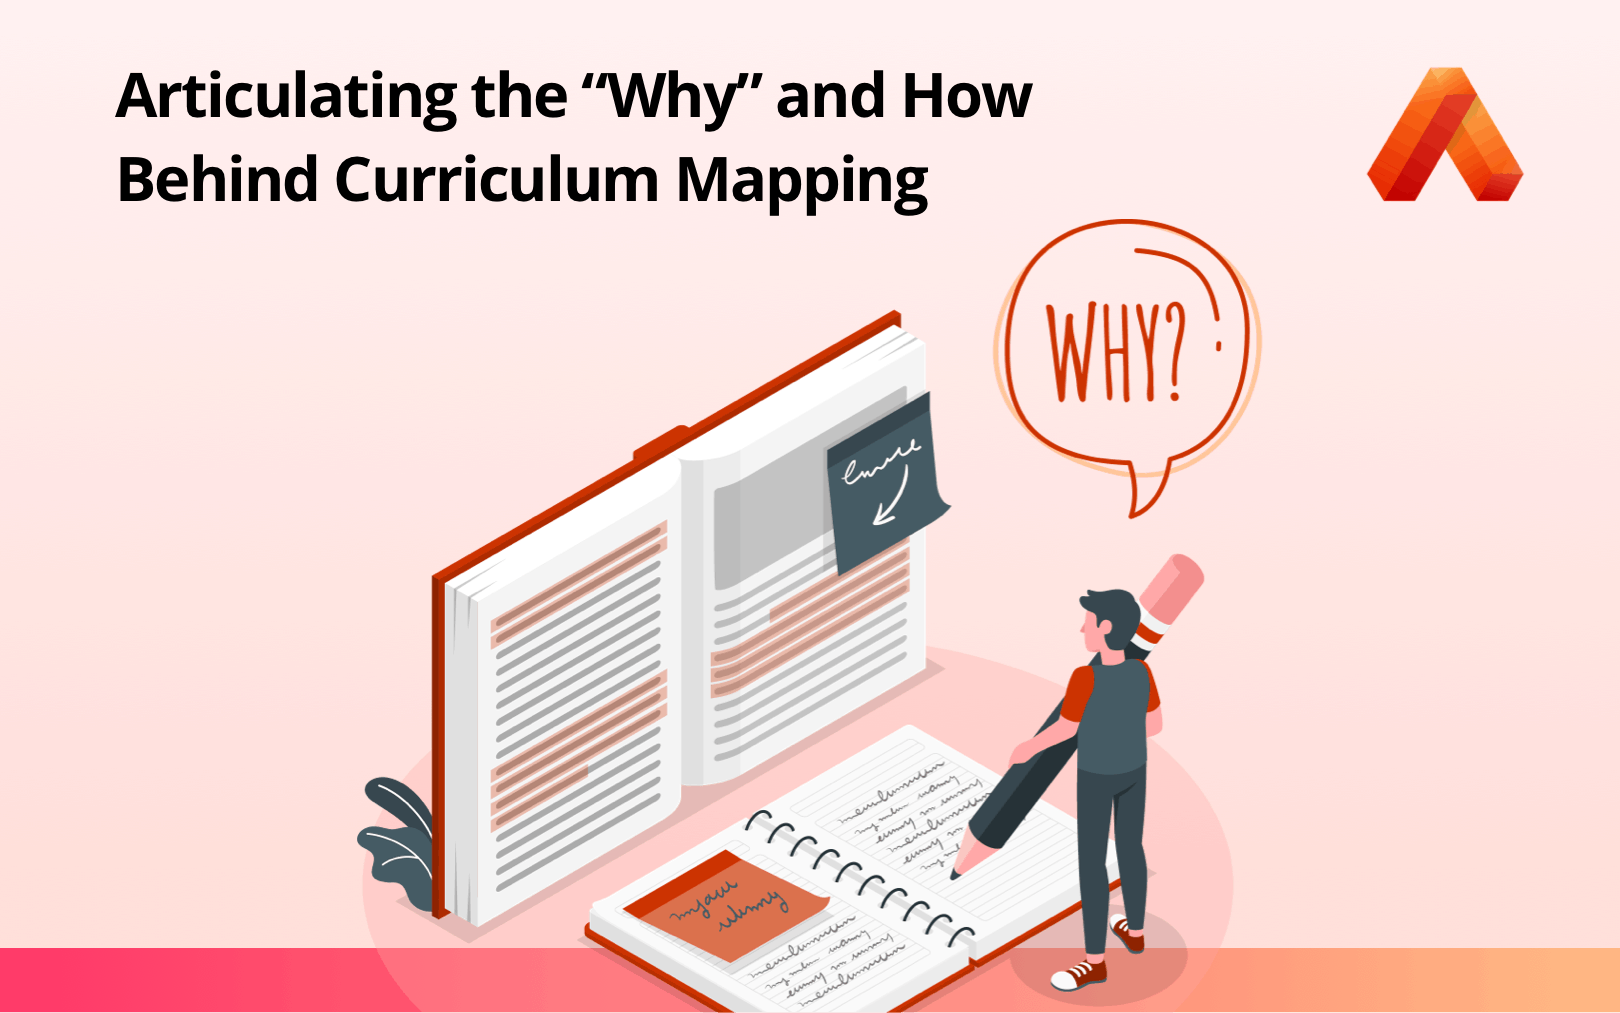 What is Curriculum Mapping?